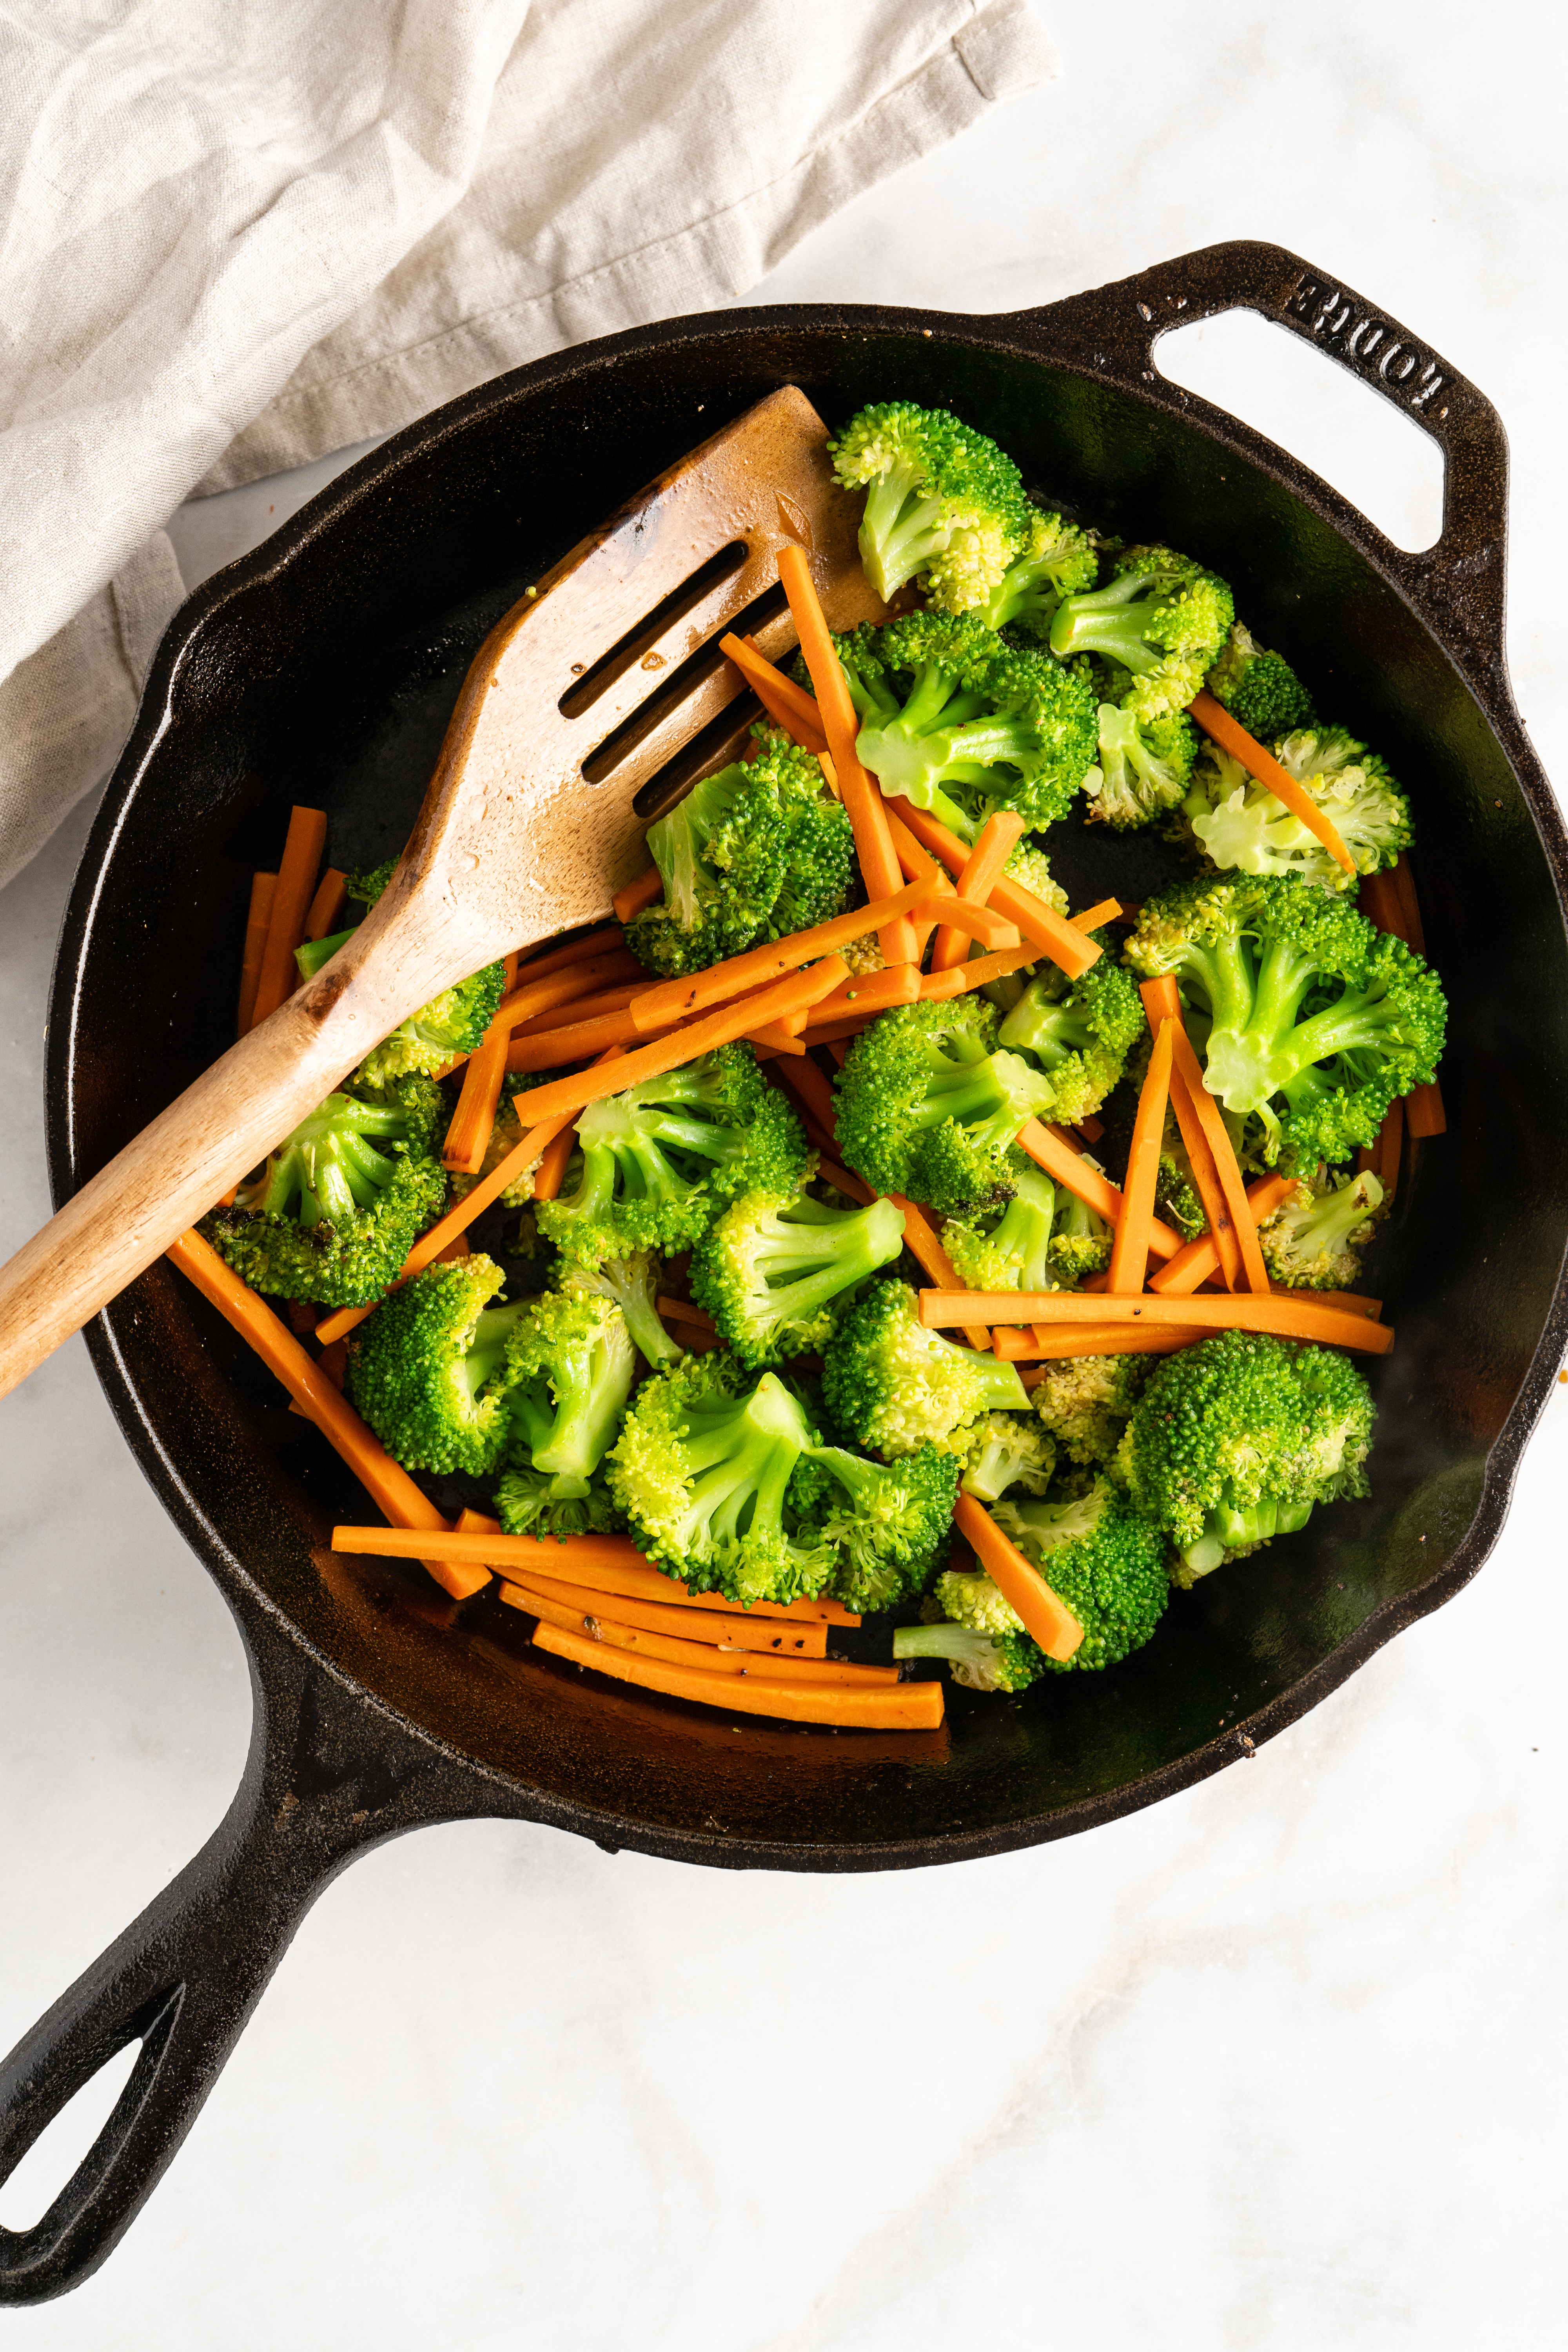 Overhead view of carrots and broccoli in cast iron skillet